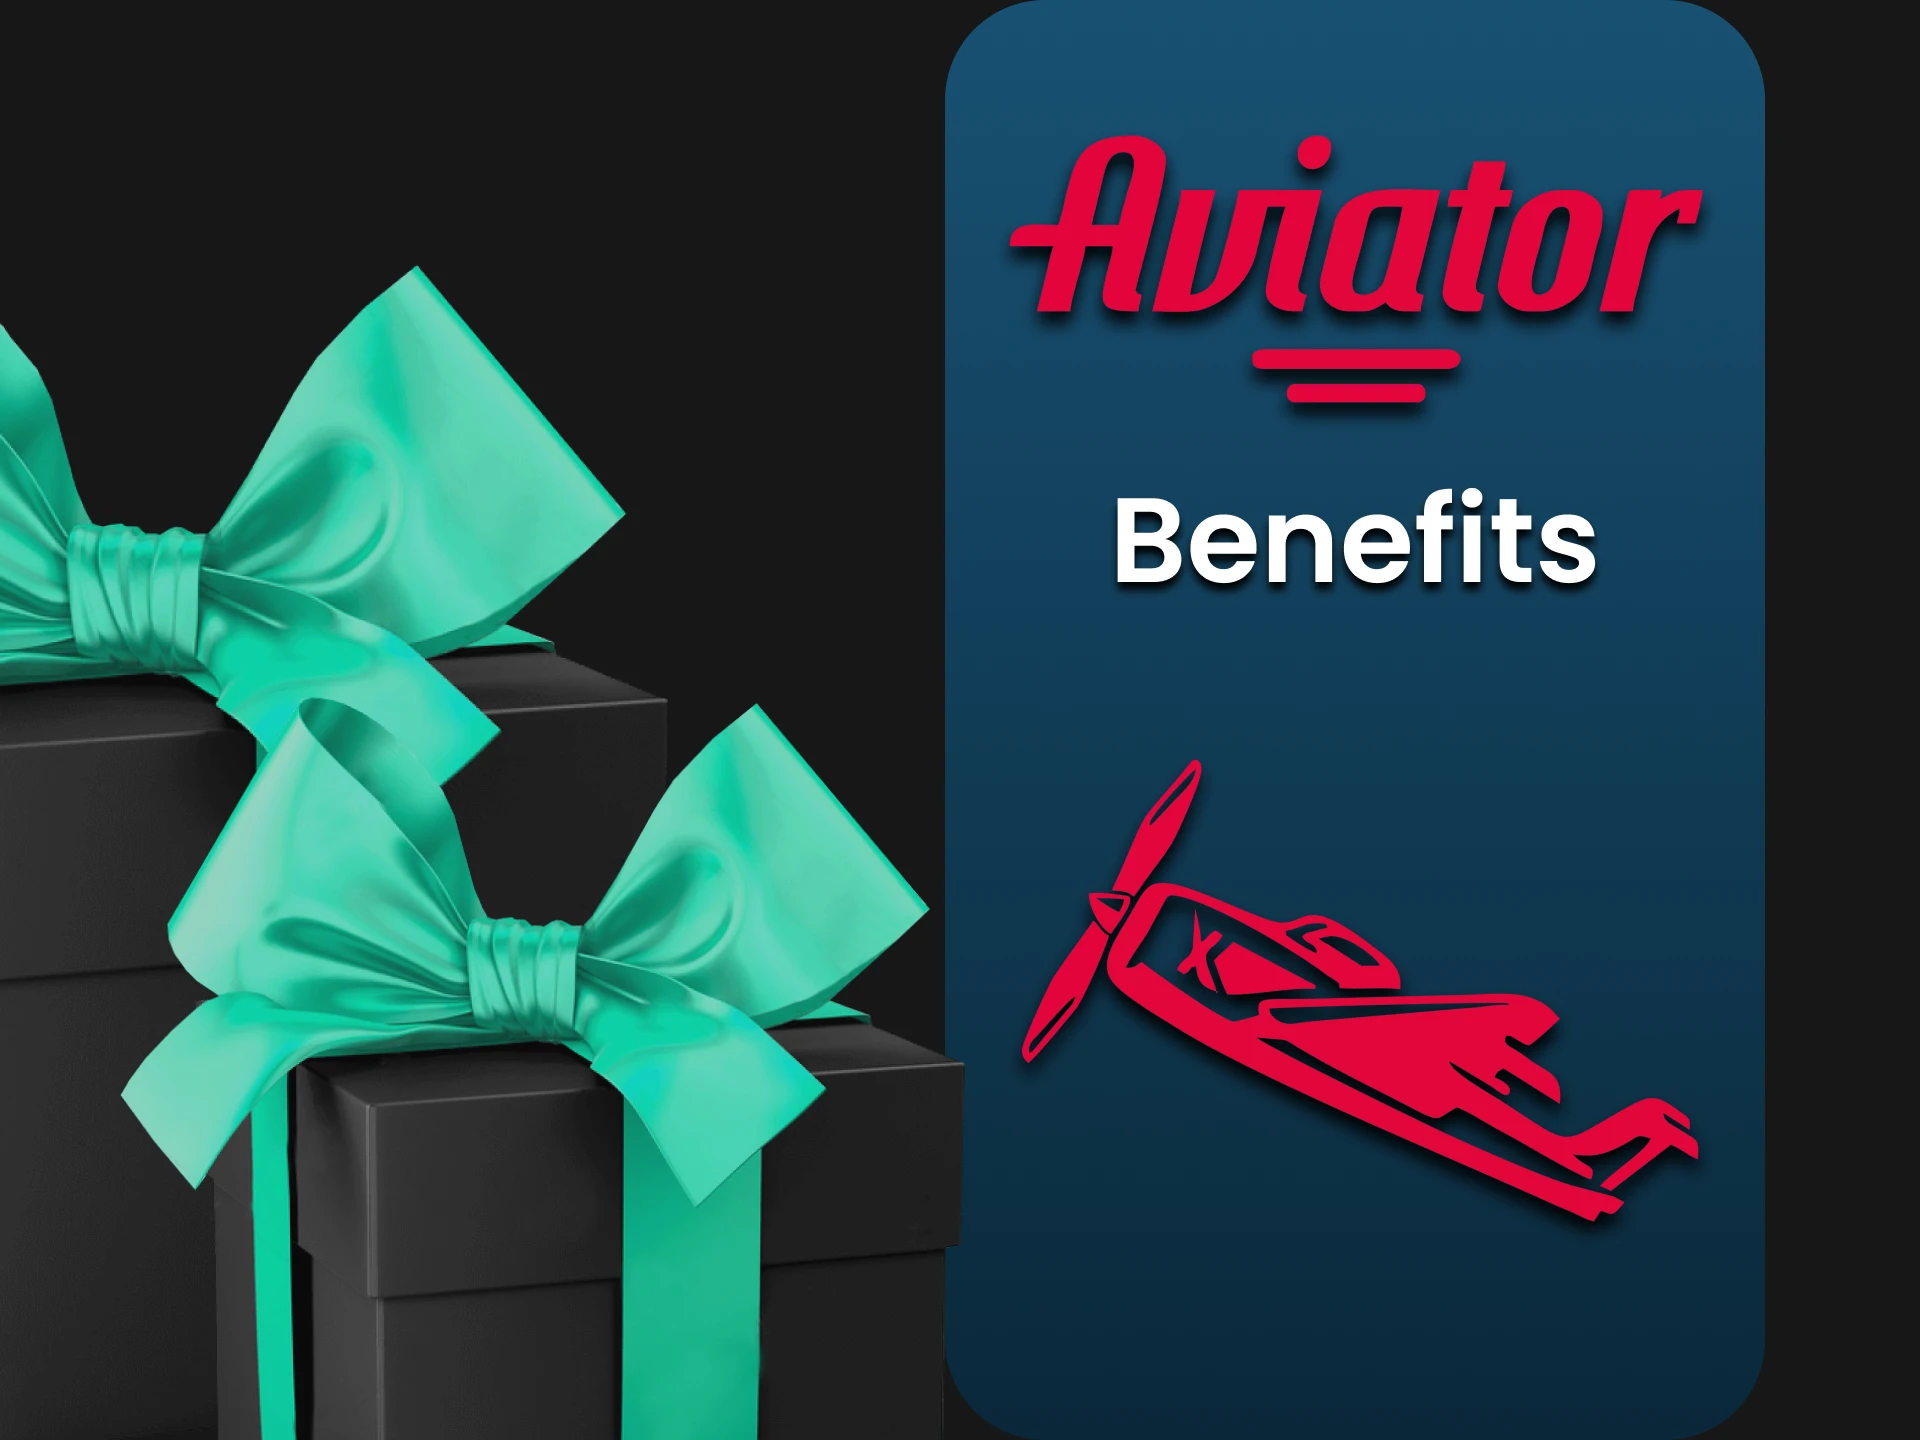 Using applications for the game Aviator you get many benefits.